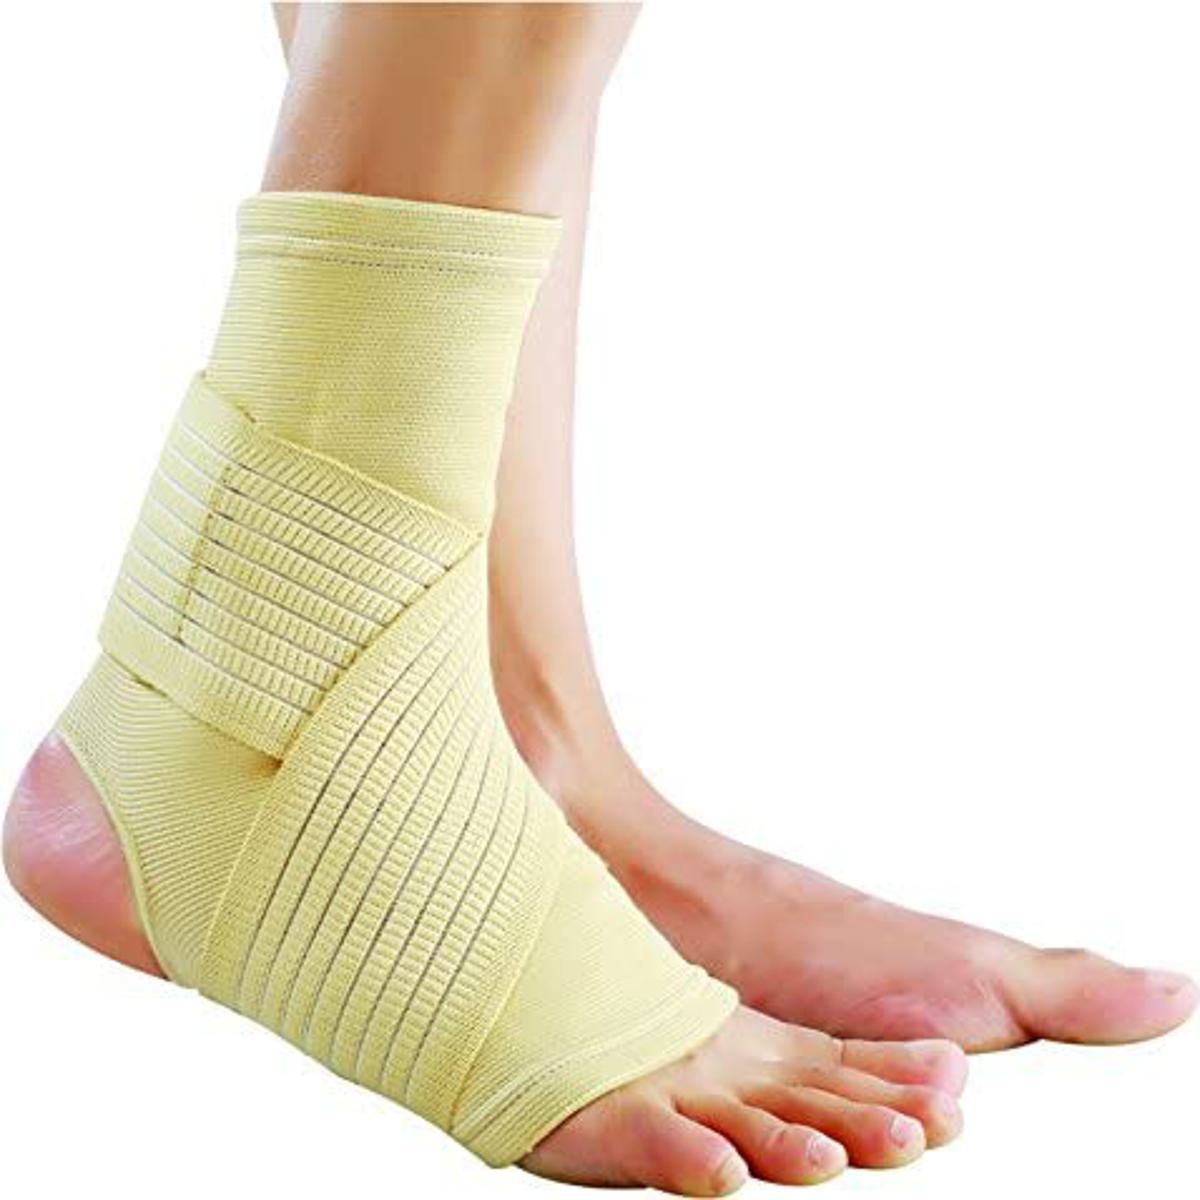 Buy Sego Ankle Binder Small, 1 Count Online